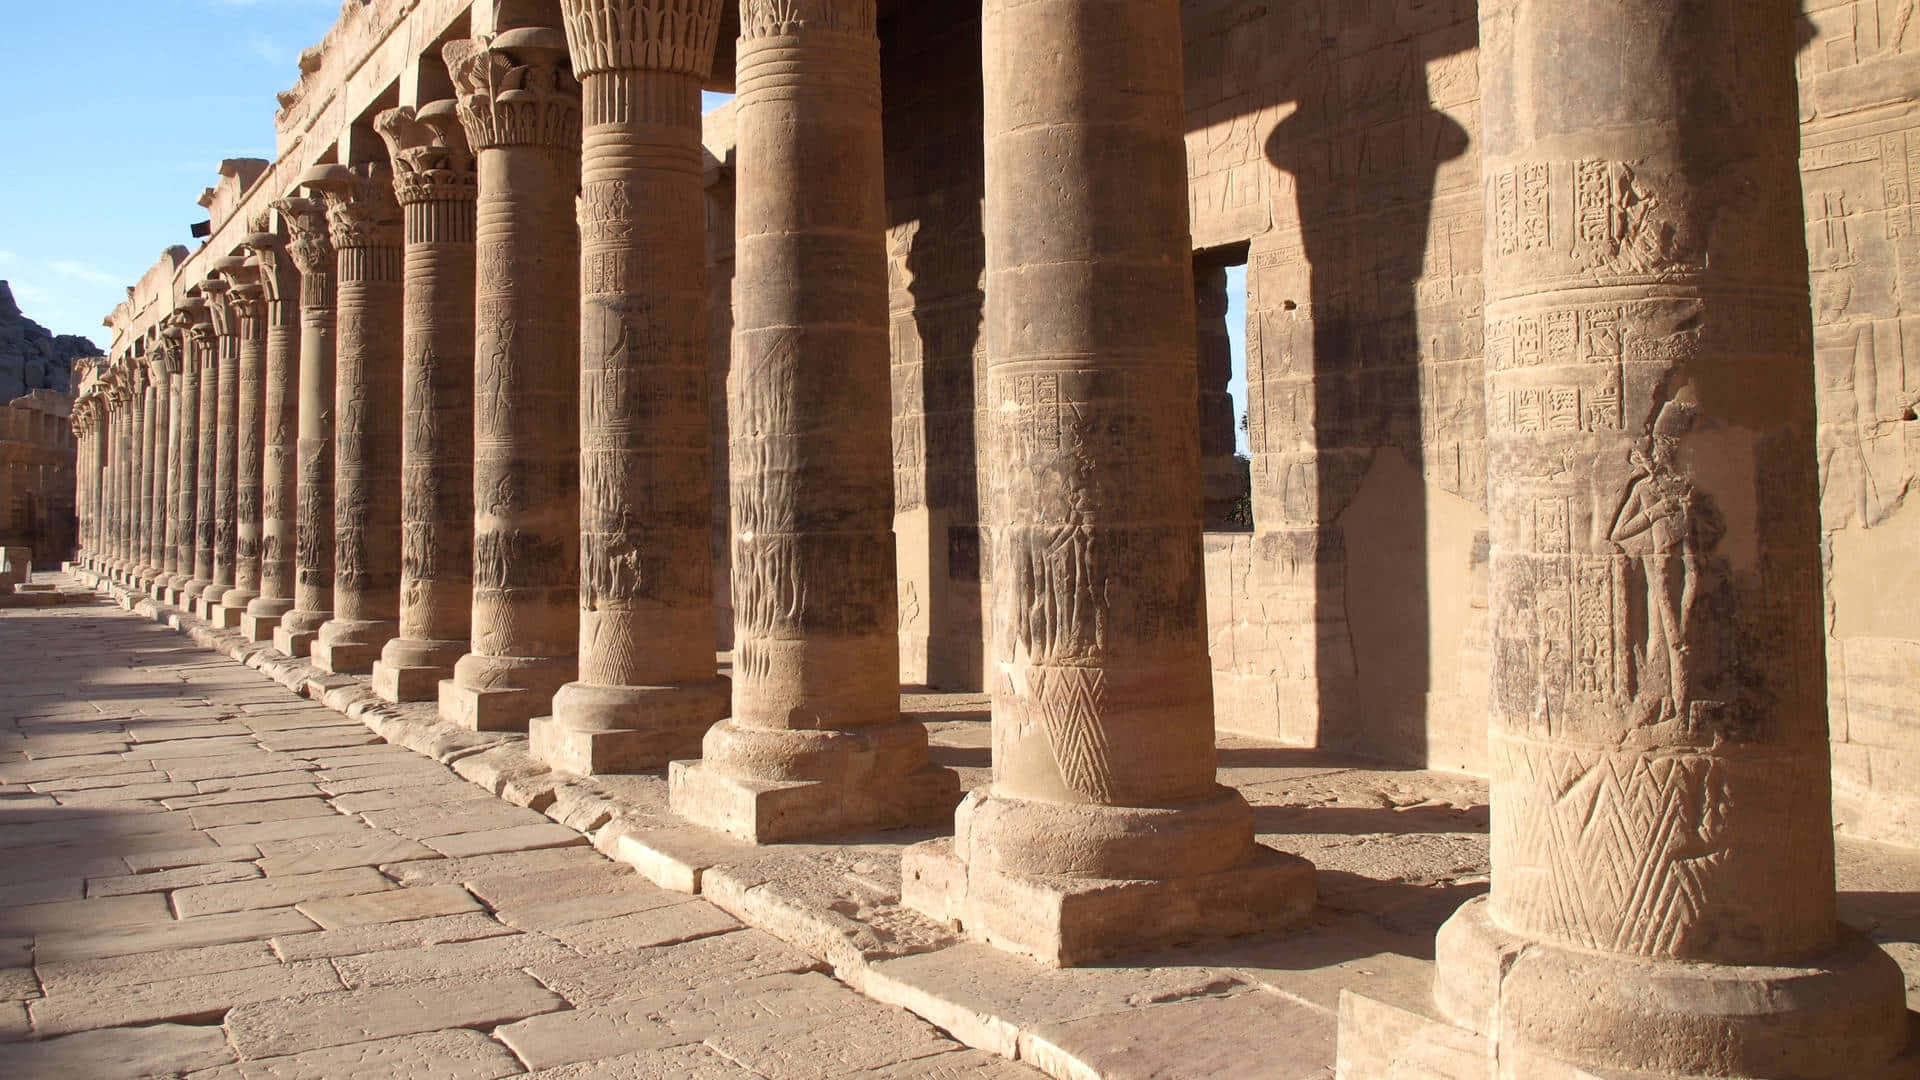 A Row Of Columns With Carvings On Them Background